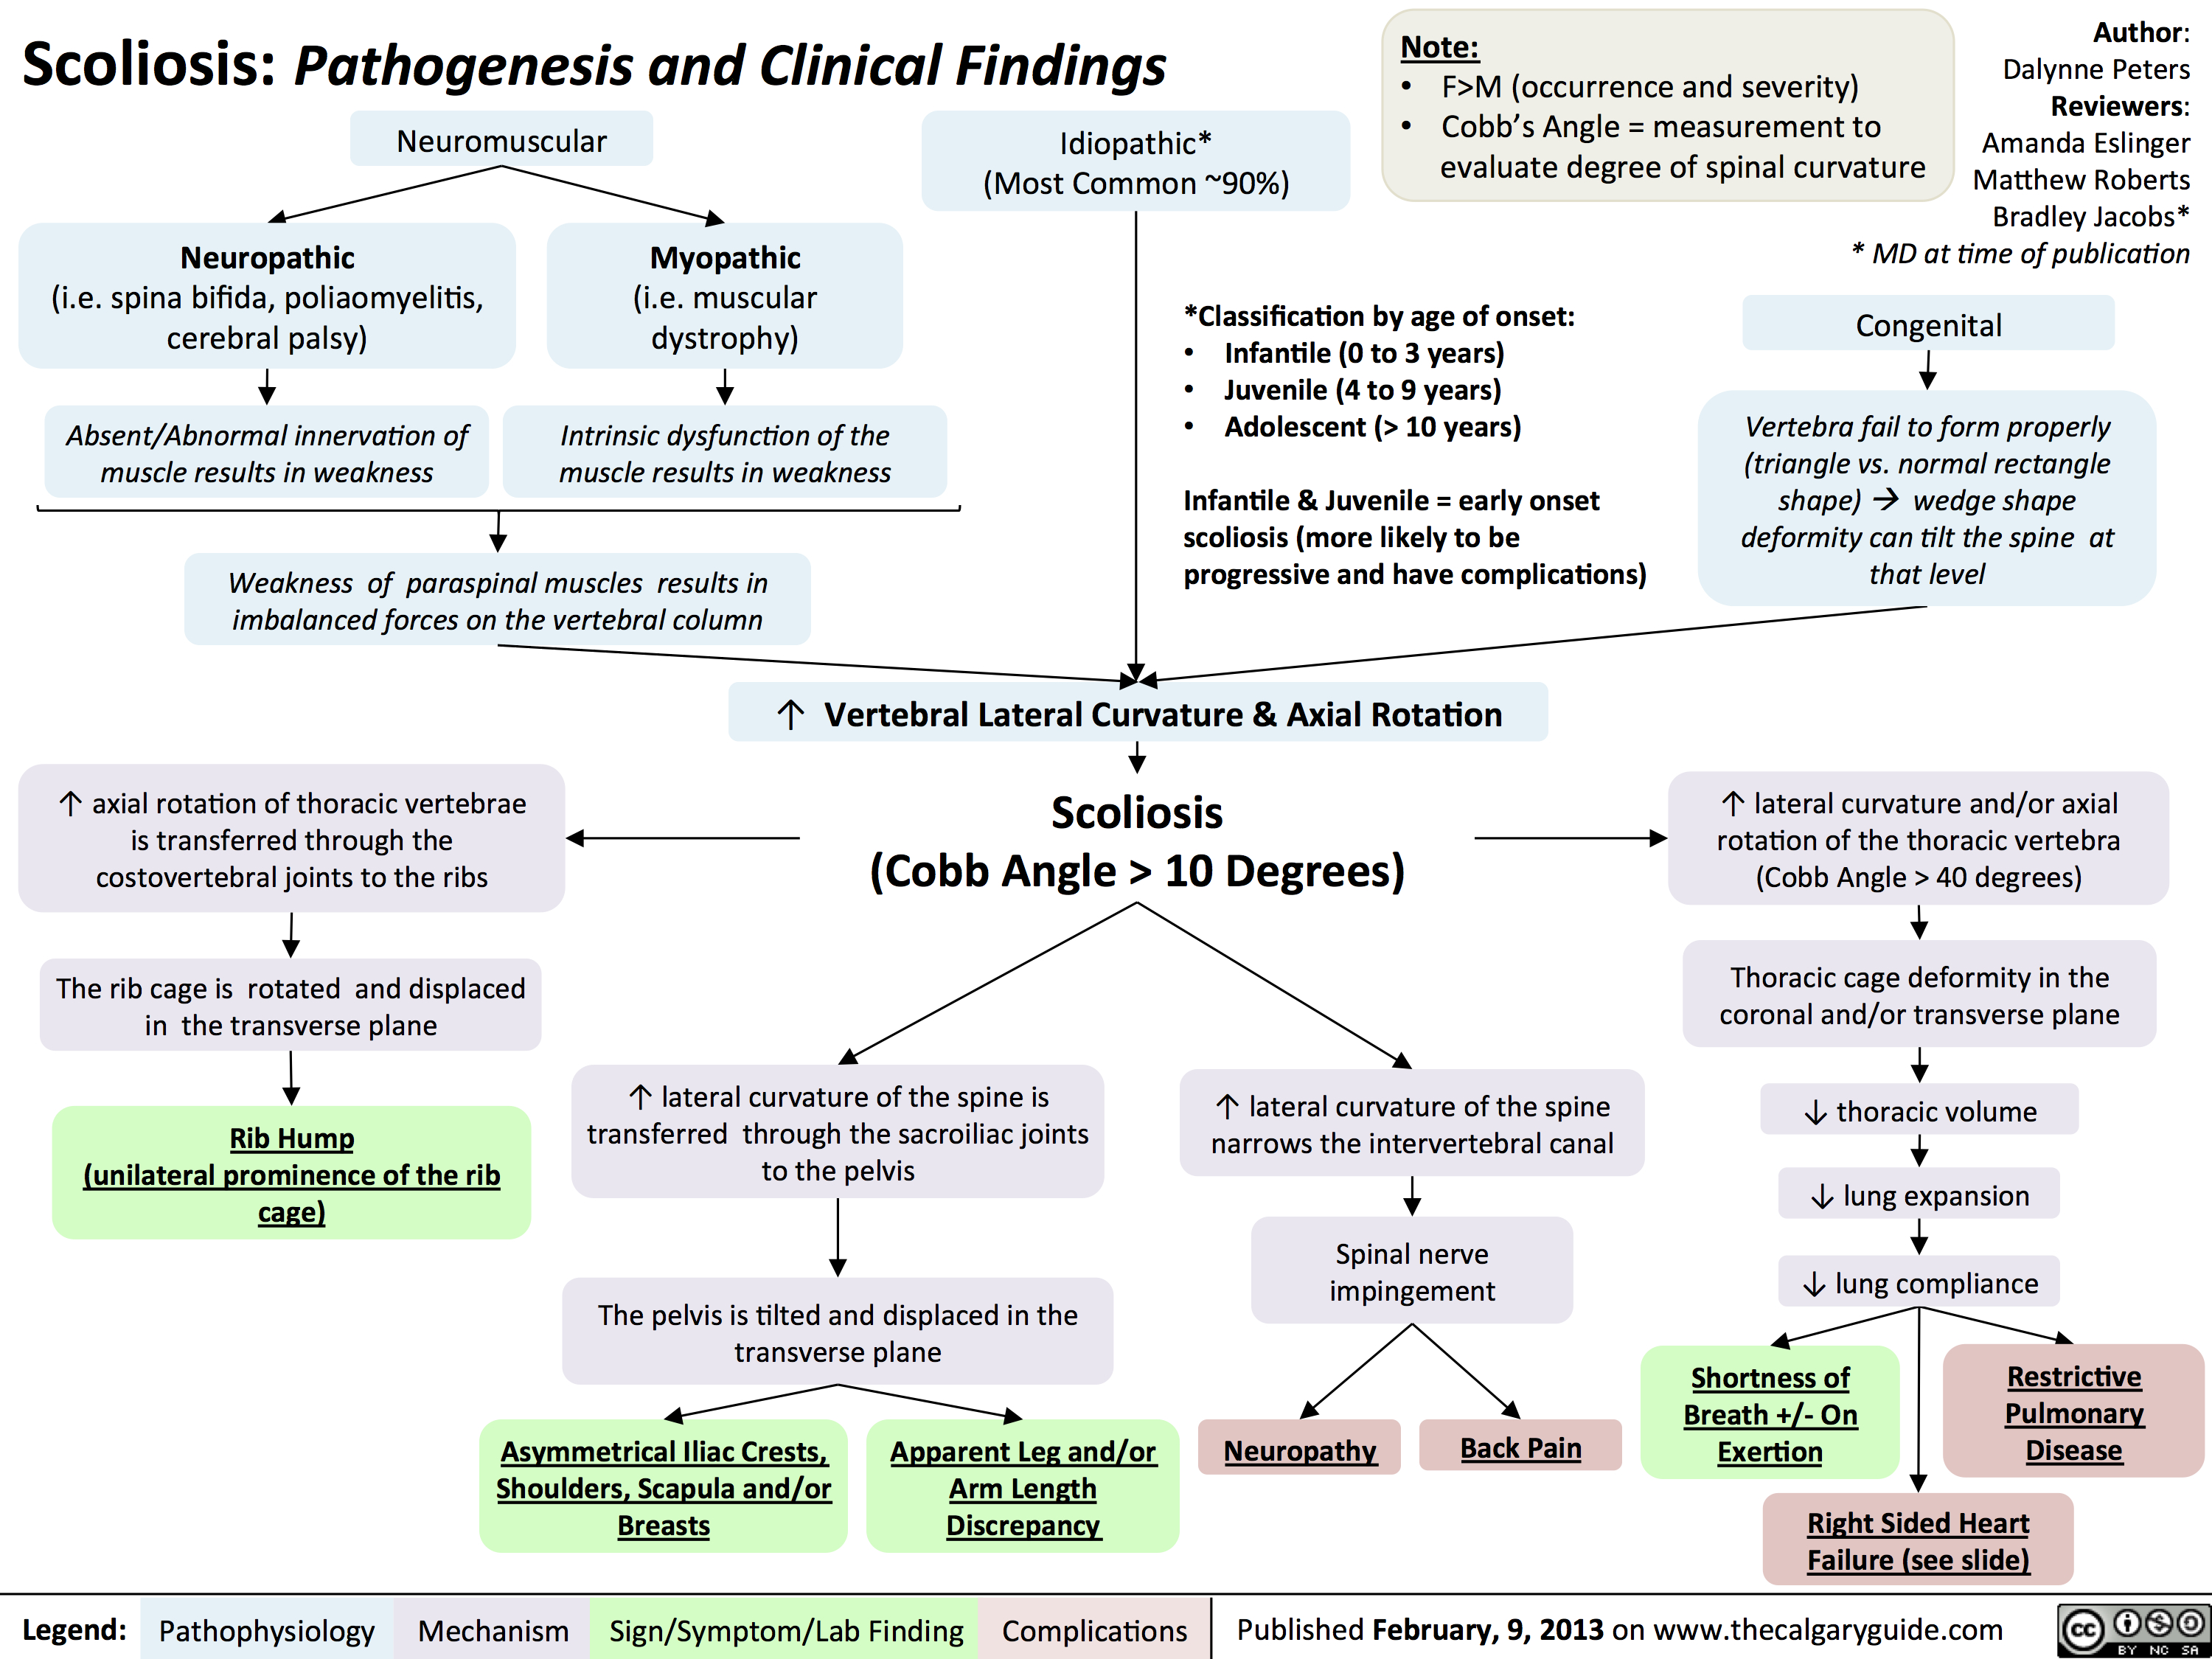 Scoliosis -Pathogenesis and Clinical Findings